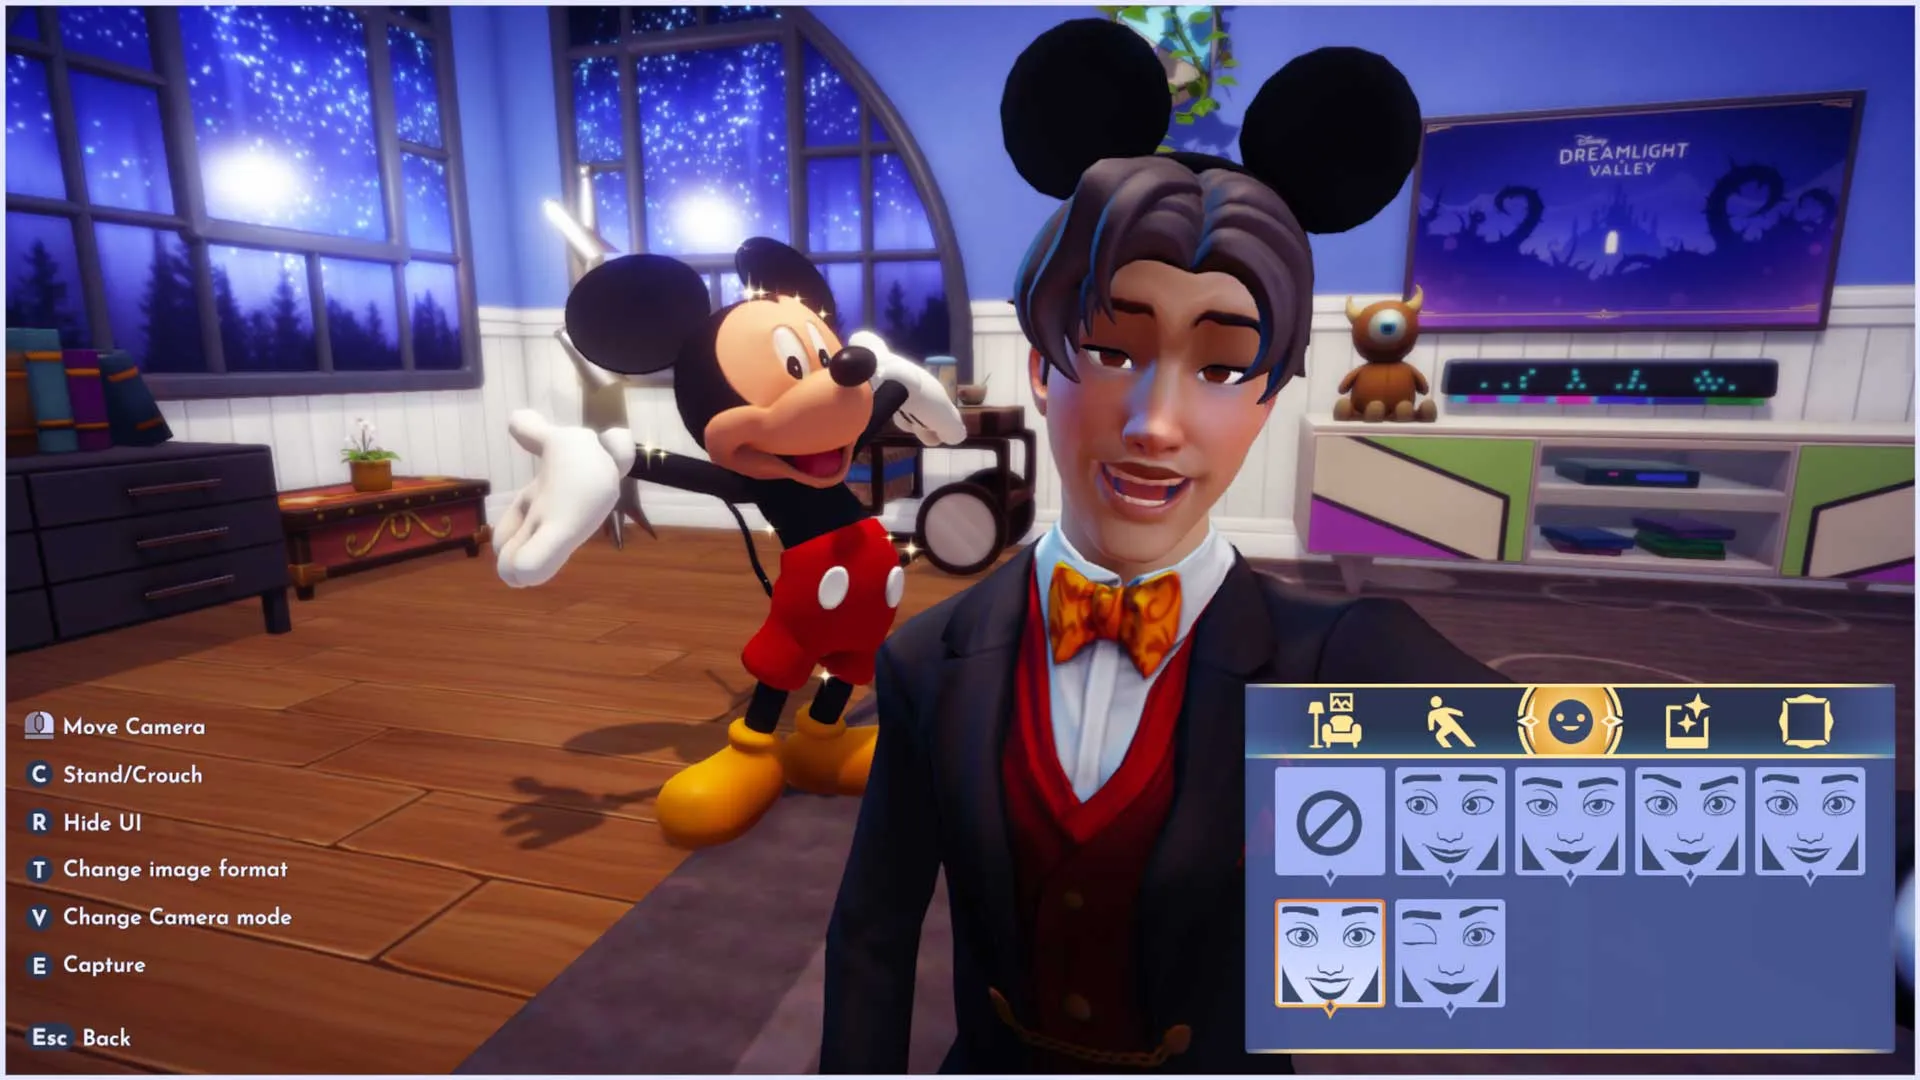 Disney Dreamlight Valley Founder's Pack pre-orders open, free Avatar Designer Tool out now